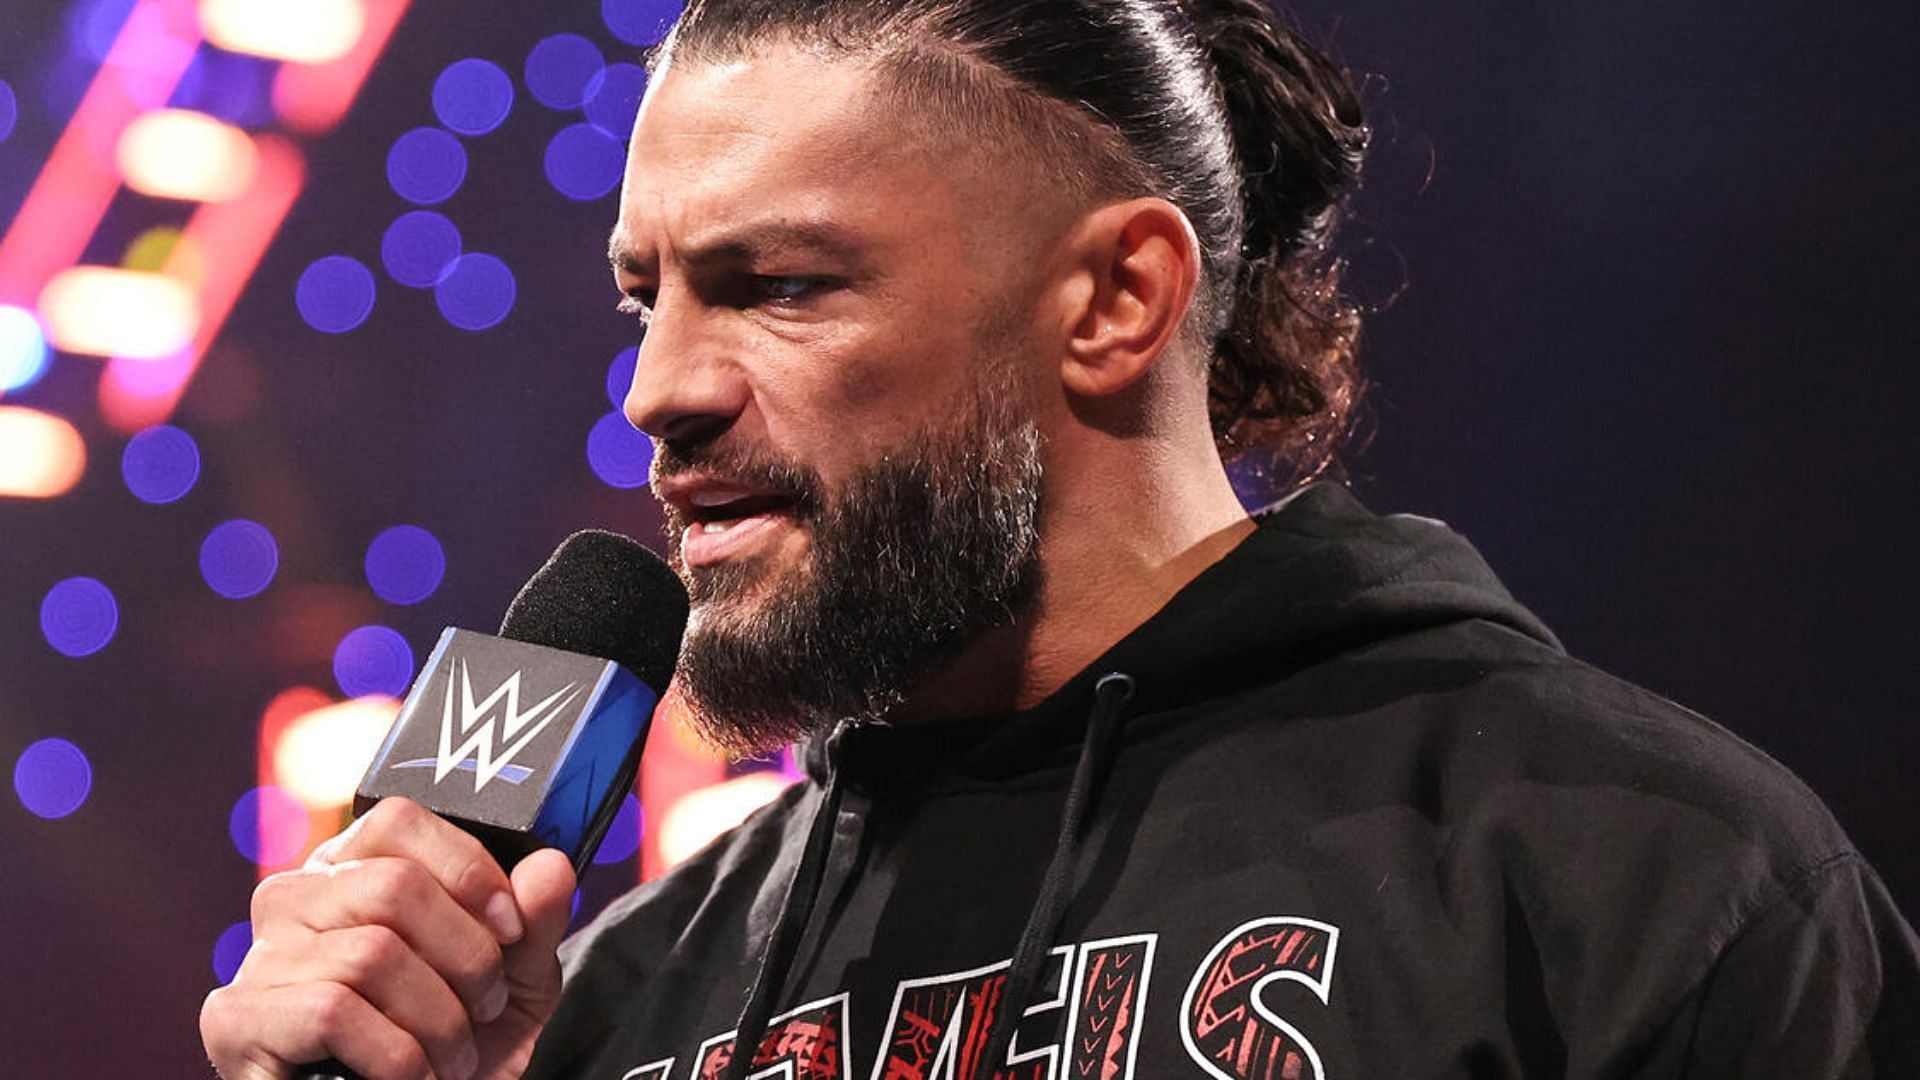 Reigns will be defending his title at WrestleMania.